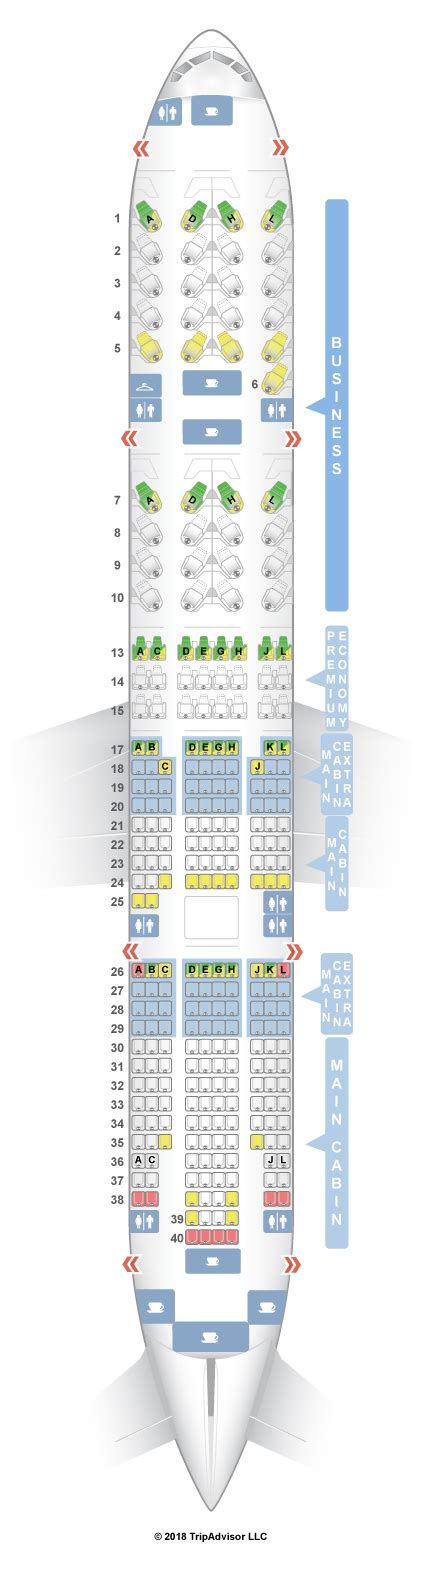 american boeing 777 200 seating chart